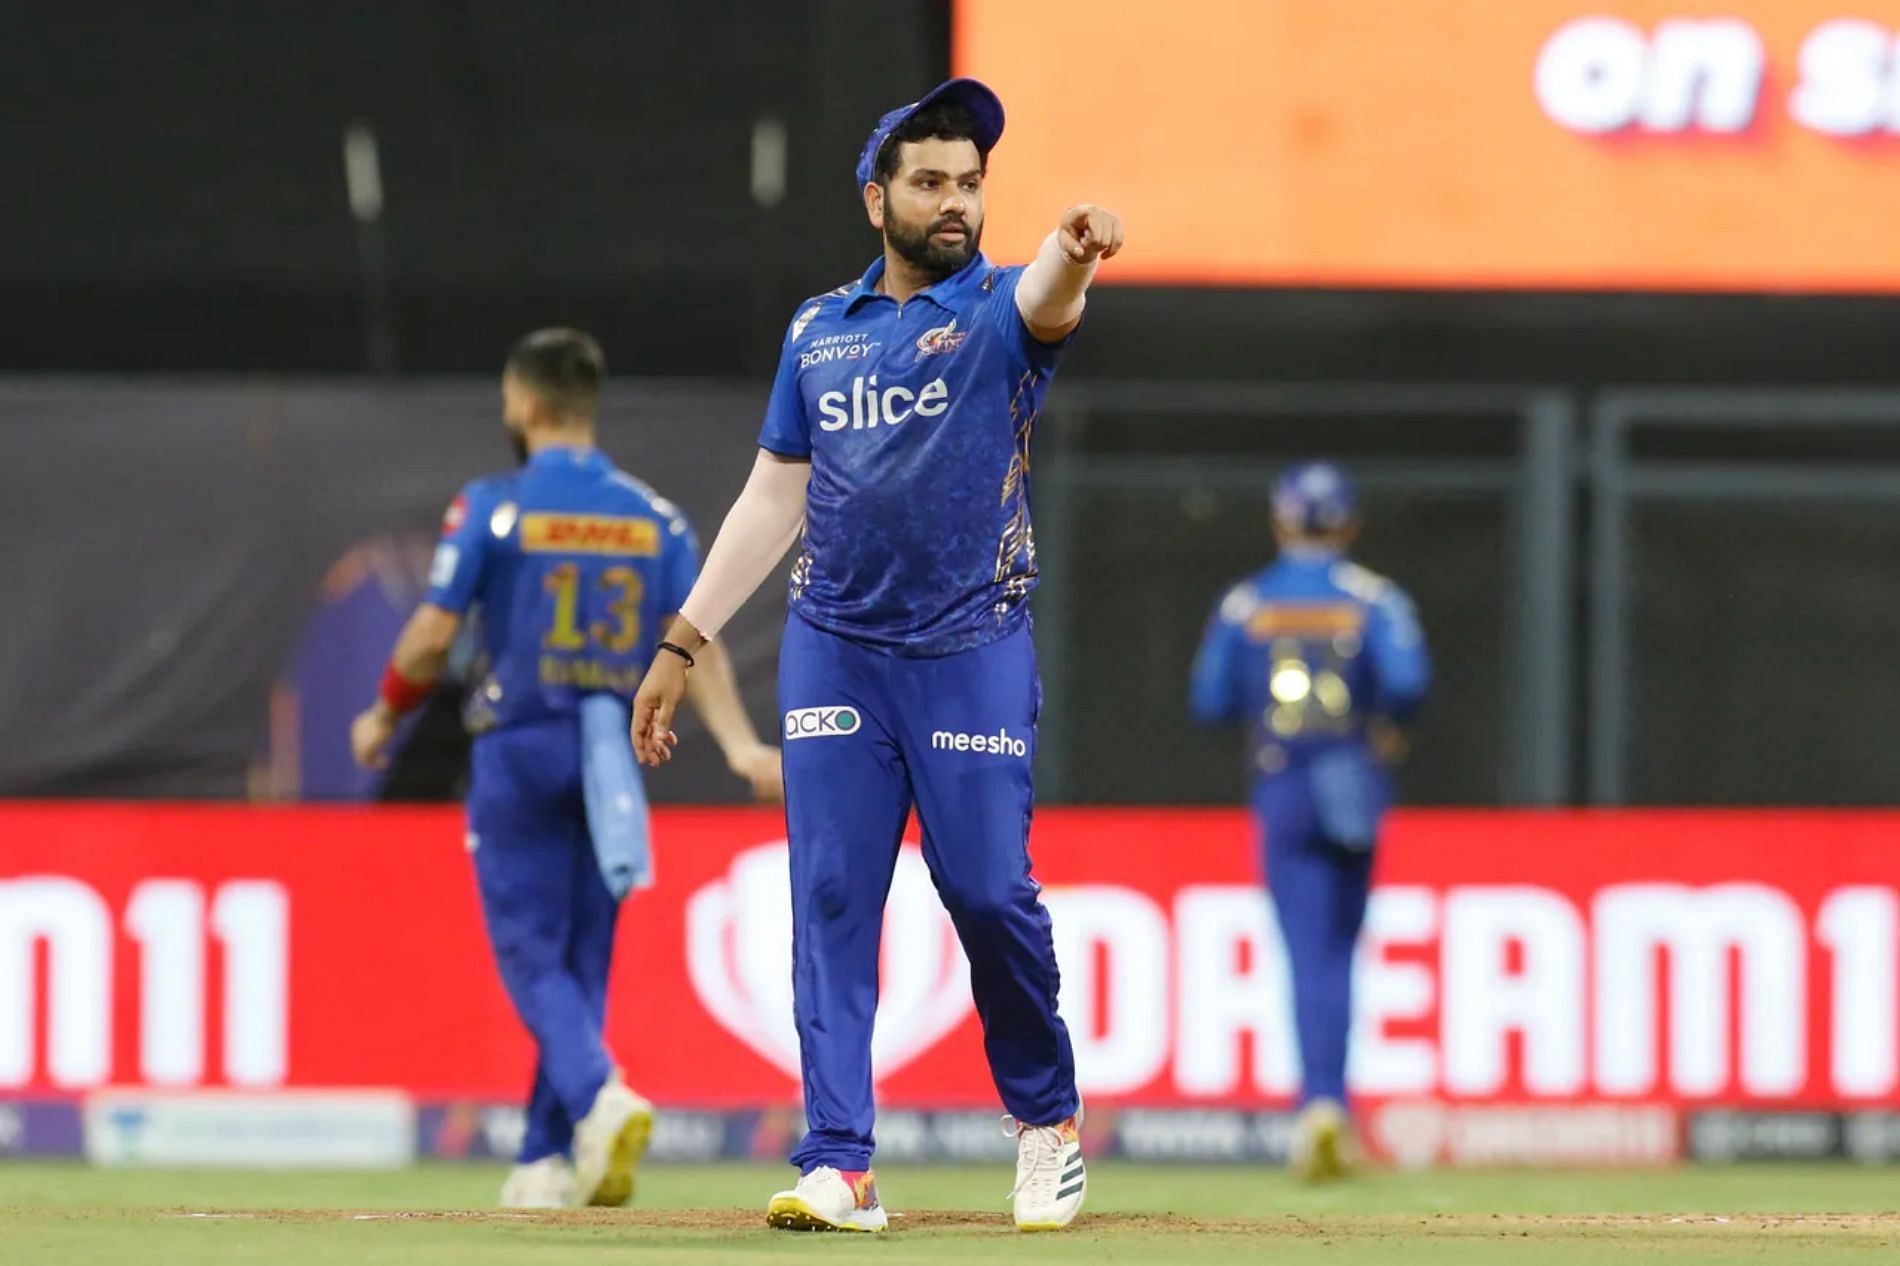 "Rohit Sharma's hands seemed tied for the first time" - Aakash Chopra reviews MI skipper's leadership in IPL 2022